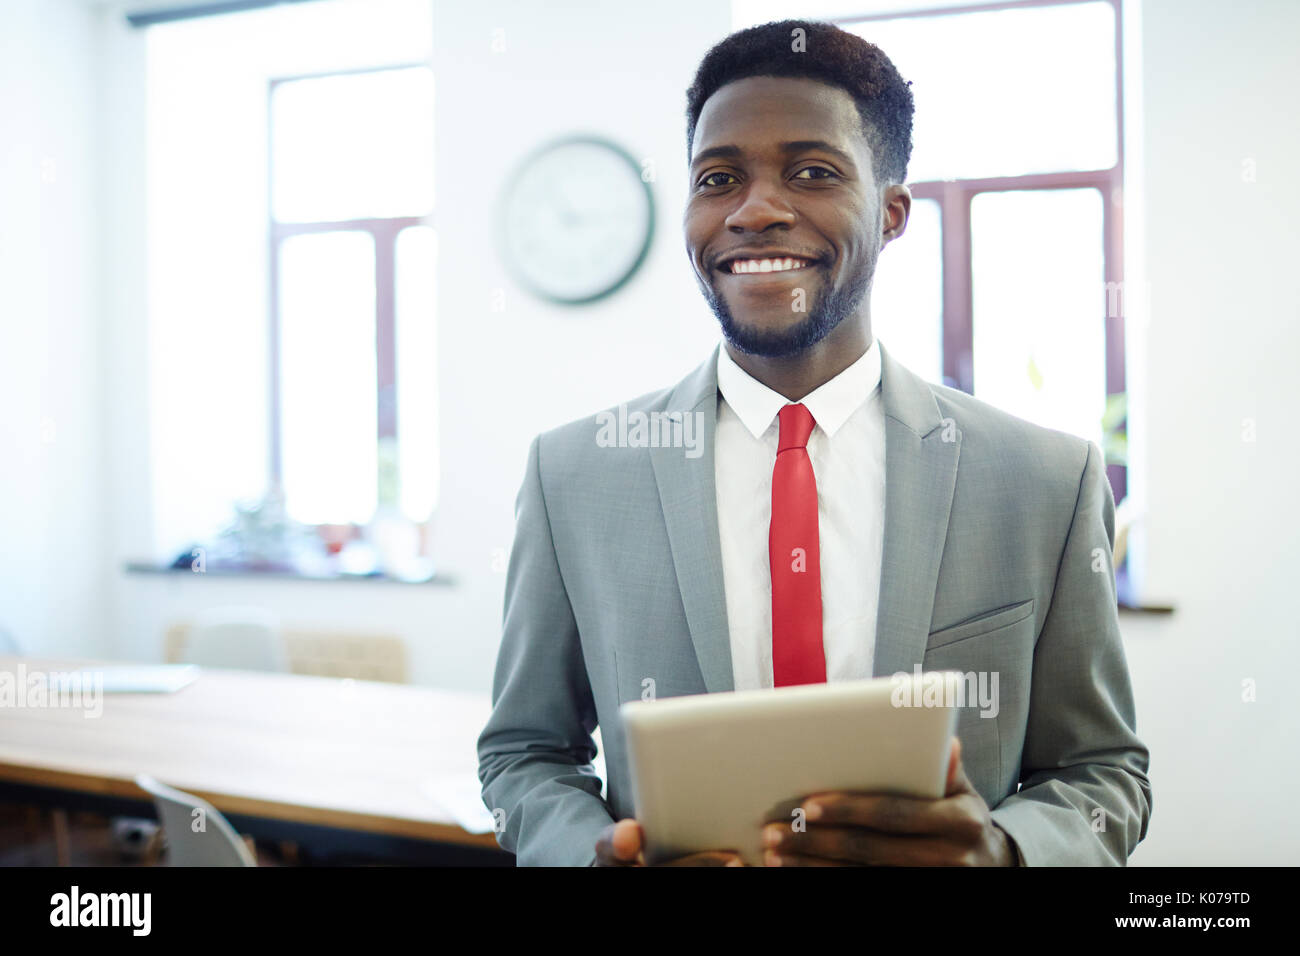 Manager in business attire Stock Photo